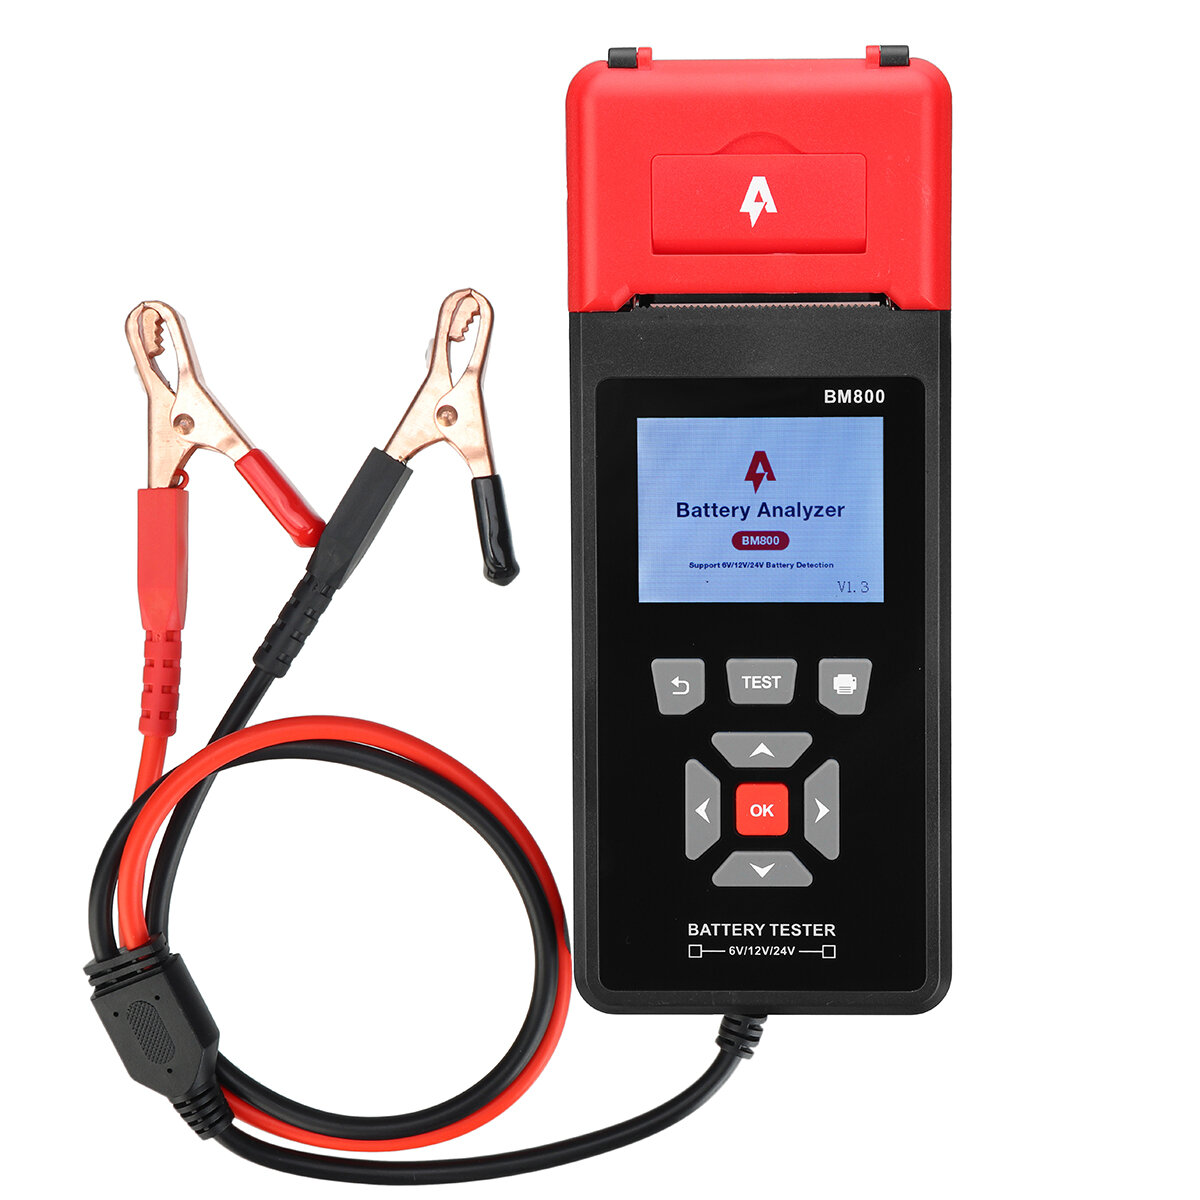 Andeman BM800 6/12/24V Car Battery Tester With Built-in Printer For Trucks Cars Motorcycles and More (Paper Included)